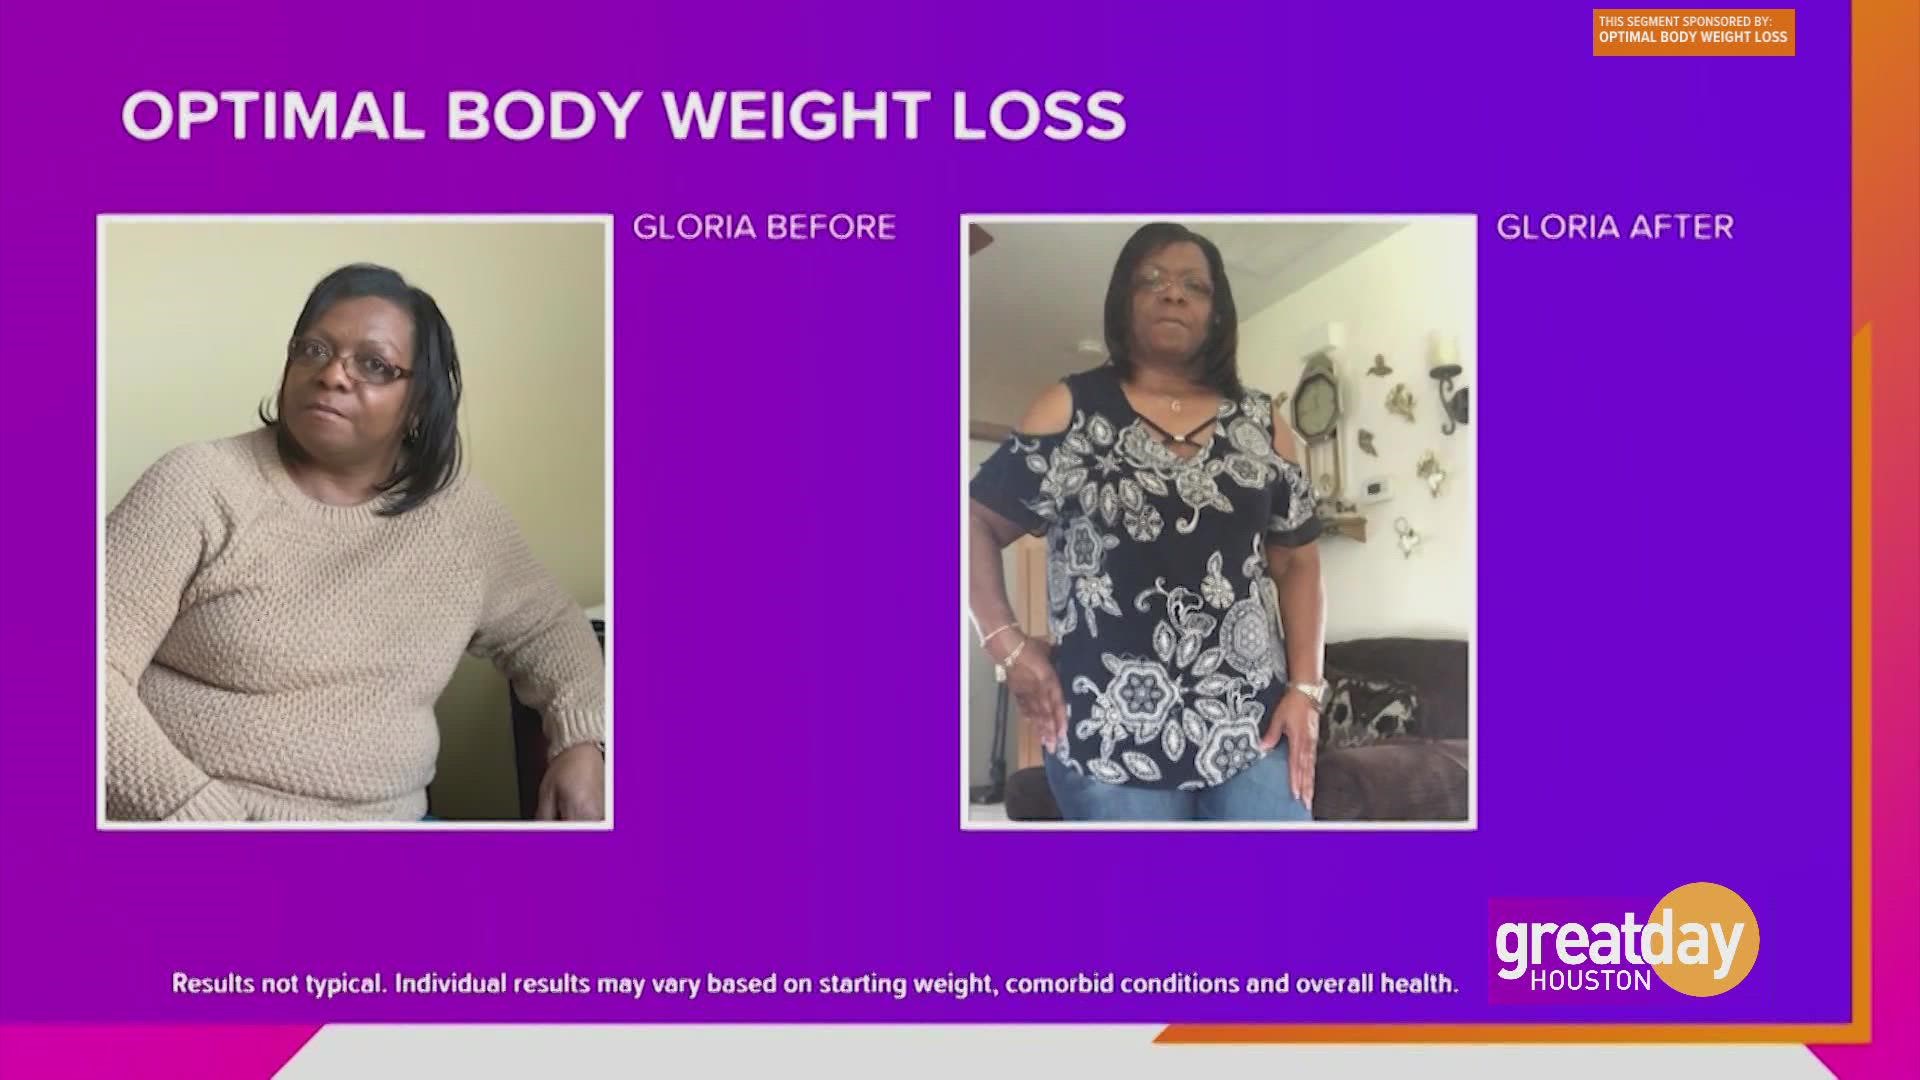 Dr. Cory Aplin describes the overwhelming success his clients have losing weight with Optimal Body